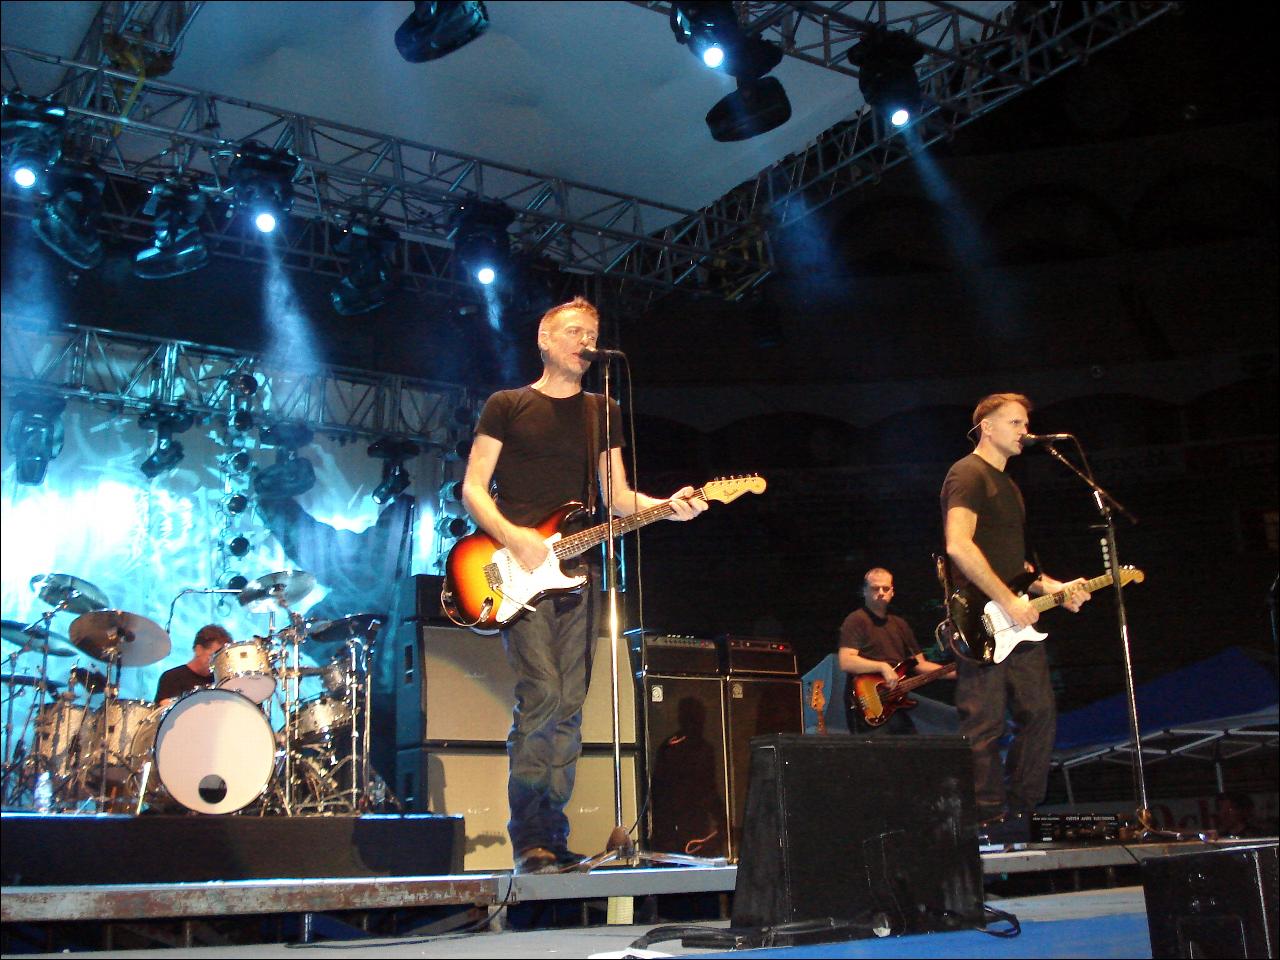 the band performs on stage at night